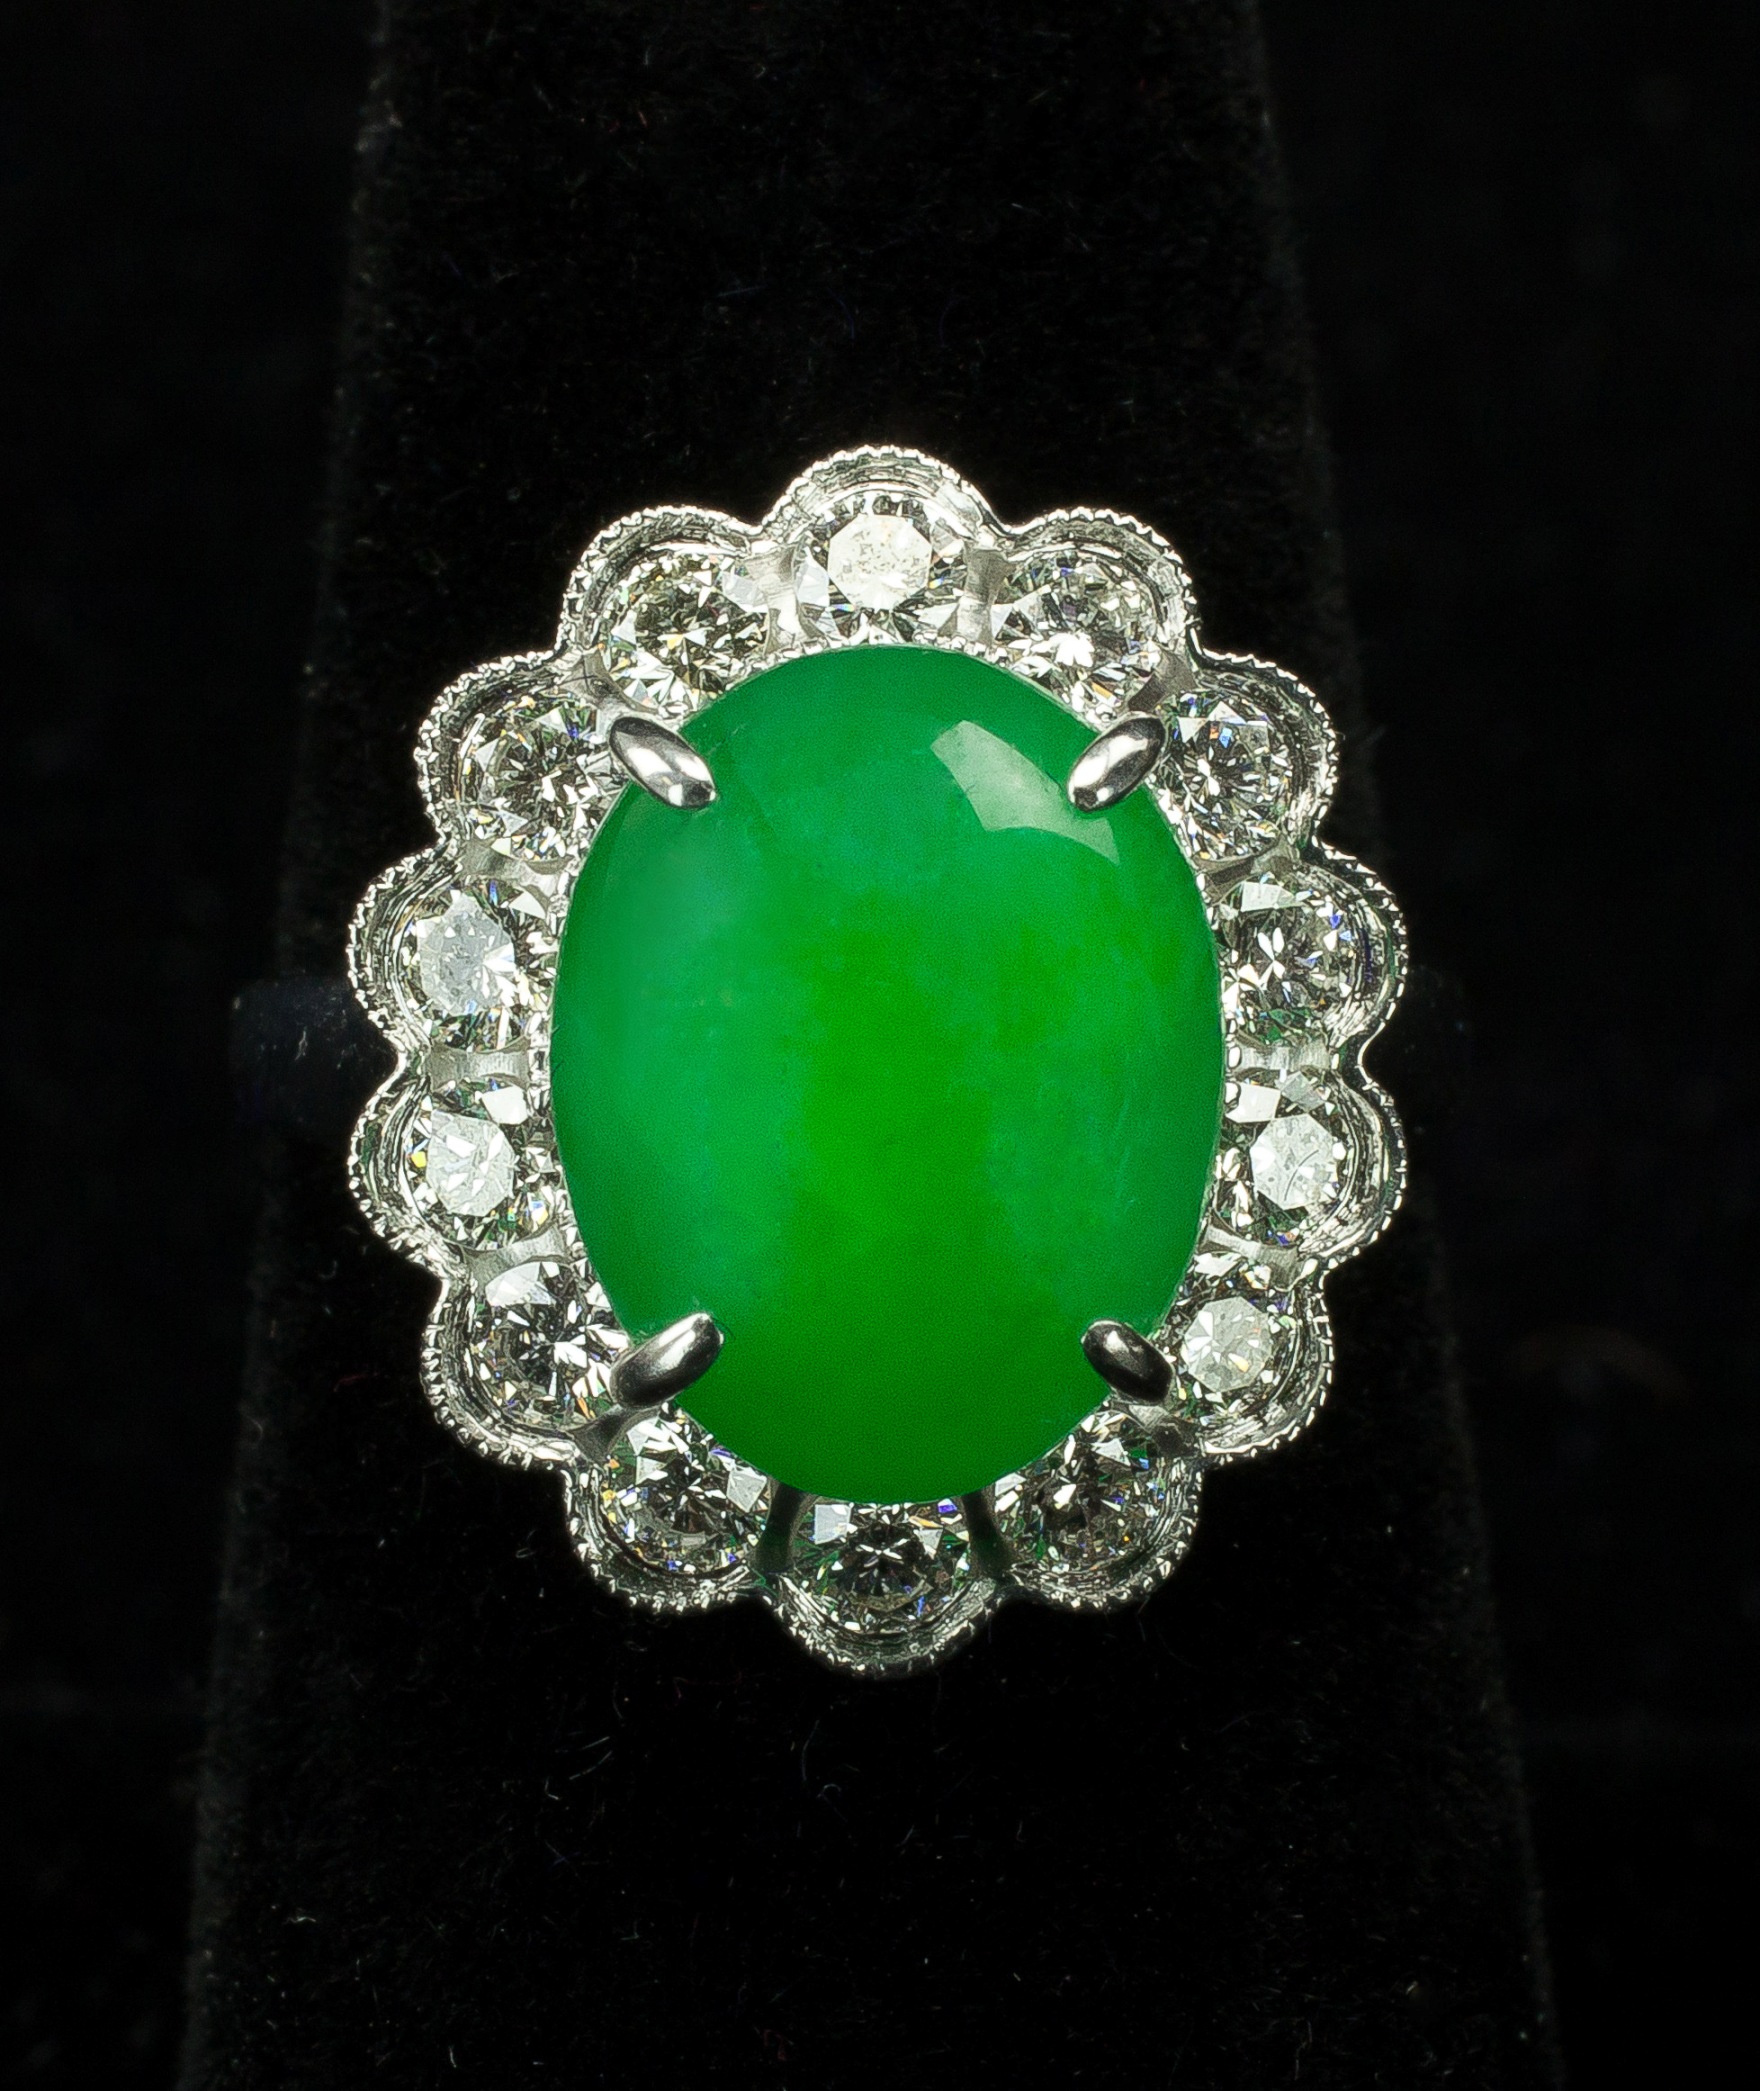 An 18K white gold ring with a vivid green jadeite jade cabochon and diamonds weighing approximately 1.2 carats sold for $5,400. Artingstall & Hind Auctioneers image